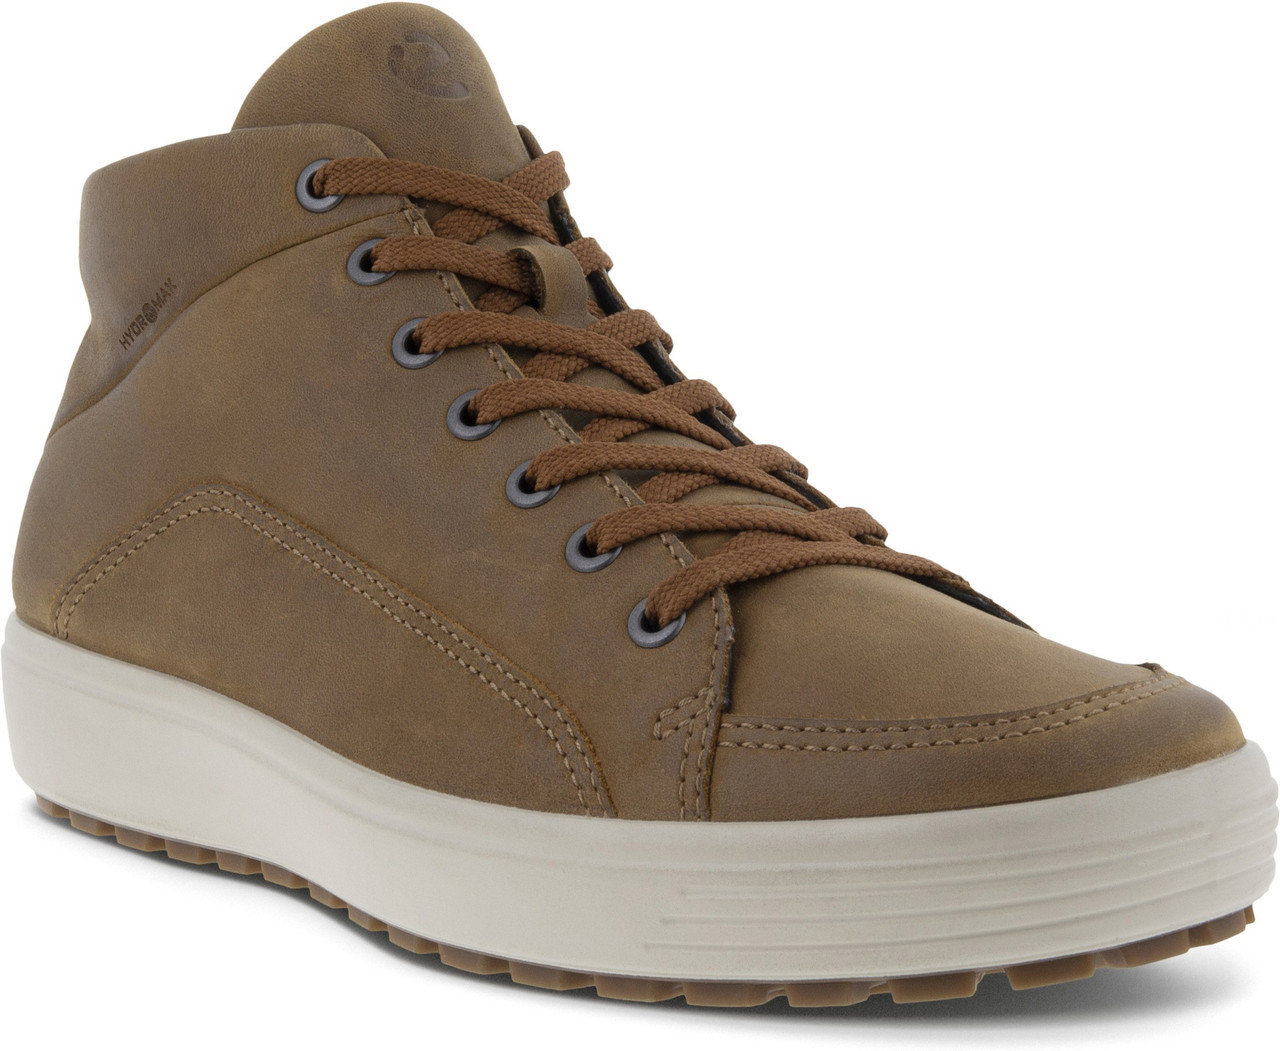 ECCO Men's Soft 7 Tred Urban Bootie - FREE Shipping & Returns - Men's Boots, Men's Sneakers & Athletic